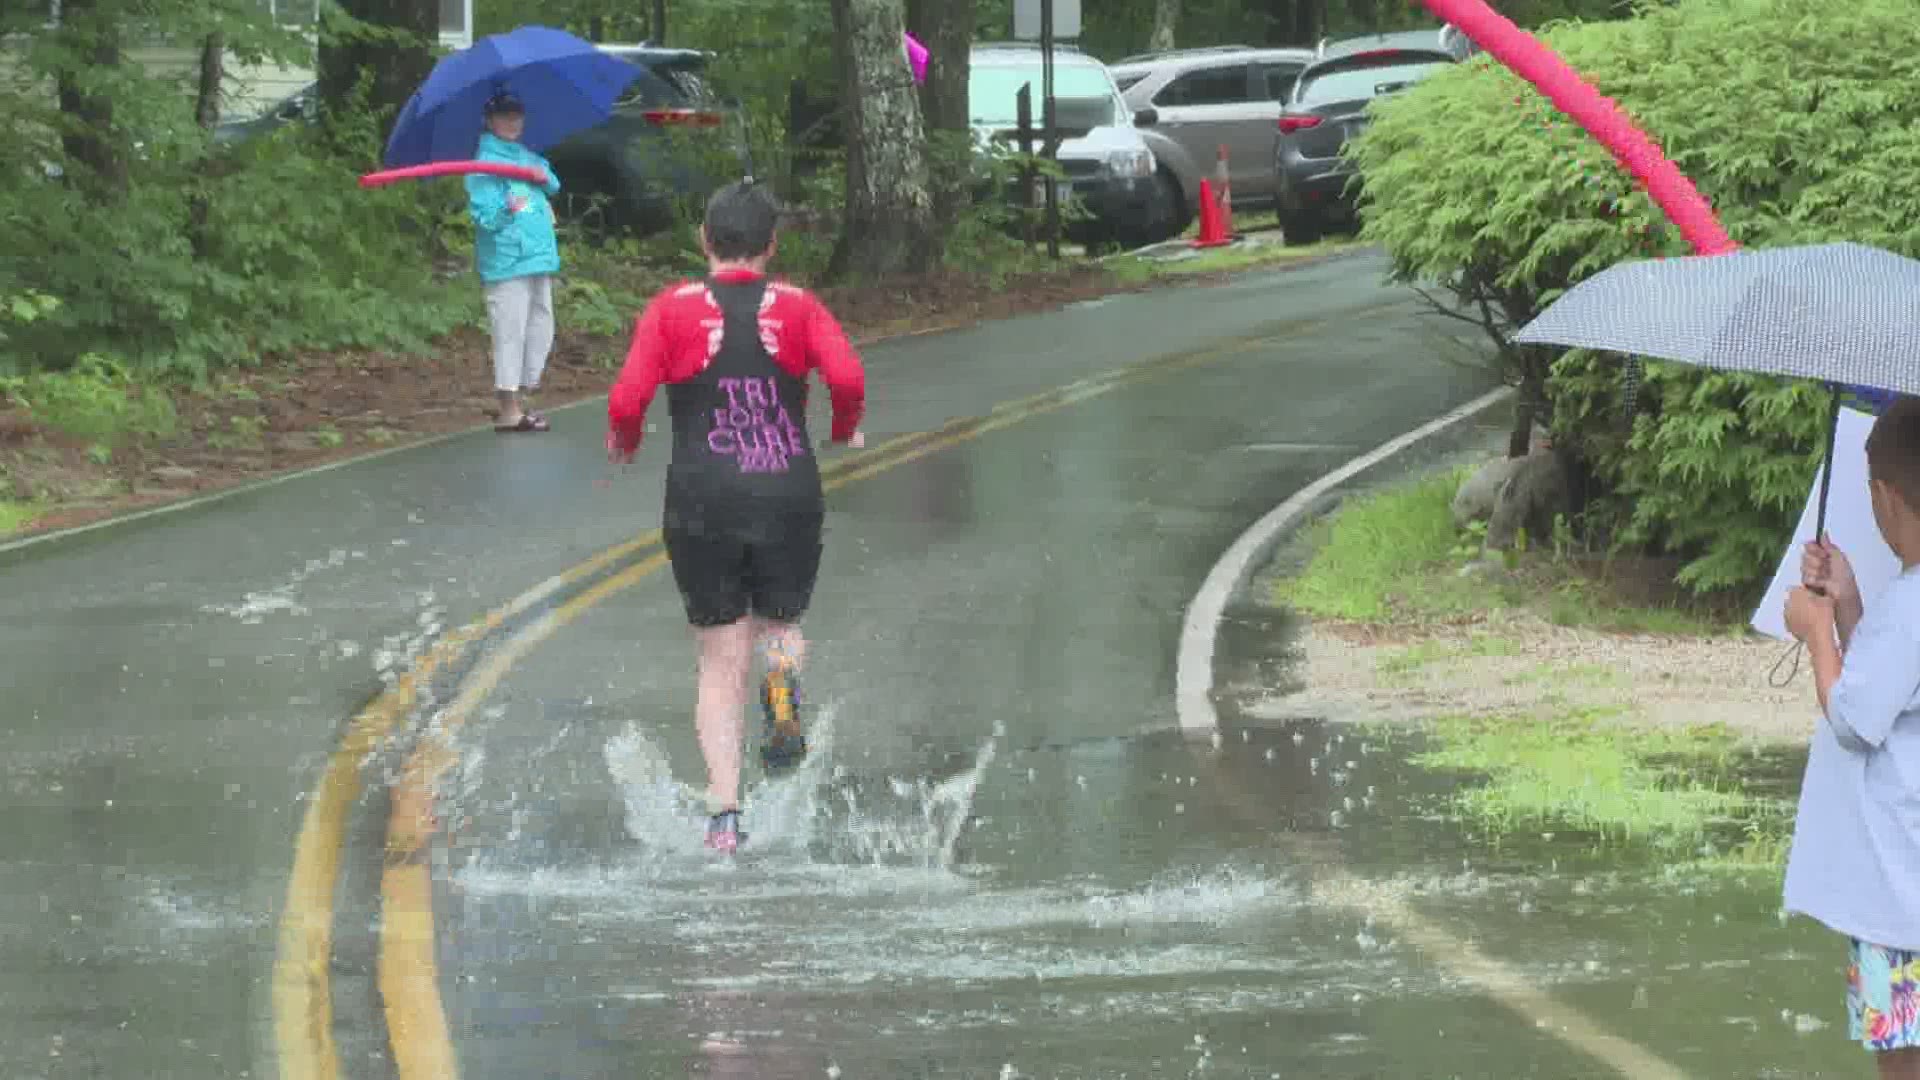 13 Ladies took part in the virtual triathlon Sunday in Standish and helped raise more than $12,000 for the Maine Cancer Center